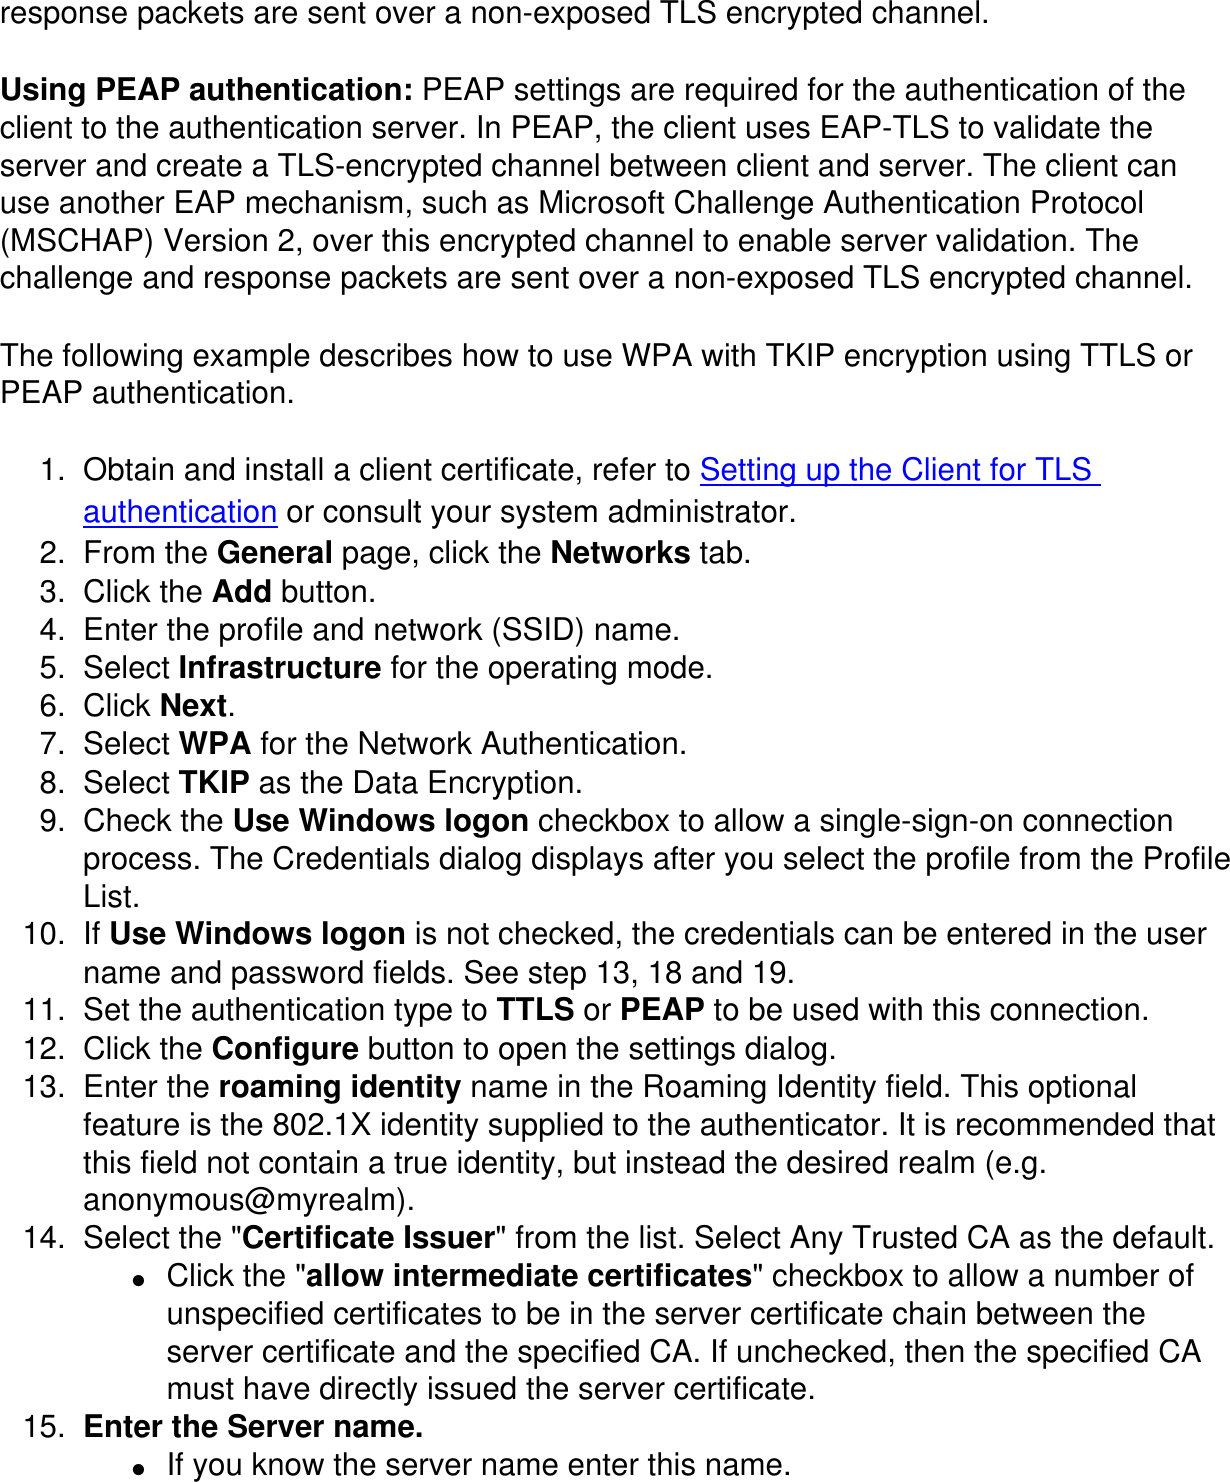 response packets are sent over a non-exposed TLS encrypted channel.Using PEAP authentication: PEAP settings are required for the authentication of the client to the authentication server. In PEAP, the client uses EAP-TLS to validate the server and create a TLS-encrypted channel between client and server. The client can use another EAP mechanism, such as Microsoft Challenge Authentication Protocol (MSCHAP) Version 2, over this encrypted channel to enable server validation. The challenge and response packets are sent over a non-exposed TLS encrypted channel. The following example describes how to use WPA with TKIP encryption using TTLS or PEAP authentication. 1.  Obtain and install a client certificate, refer to Setting up the Client for TLS authentication or consult your system administrator. 2.  From the General page, click the Networks tab. 3.  Click the Add button. 4.  Enter the profile and network (SSID) name. 5.  Select Infrastructure for the operating mode. 6.  Click Next. 7.  Select WPA for the Network Authentication. 8.  Select TKIP as the Data Encryption. 9.  Check the Use Windows logon checkbox to allow a single-sign-on connection process. The Credentials dialog displays after you select the profile from the Profile List. 10.  If Use Windows logon is not checked, the credentials can be entered in the user name and password fields. See step 13, 18 and 19. 11.  Set the authentication type to TTLS or PEAP to be used with this connection. 12.  Click the Configure button to open the settings dialog. 13.  Enter the roaming identity name in the Roaming Identity field. This optional feature is the 802.1X identity supplied to the authenticator. It is recommended that this field not contain a true identity, but instead the desired realm (e.g. anonymous@myrealm). 14.  Select the &quot;Certificate Issuer&quot; from the list. Select Any Trusted CA as the default. ●     Click the &quot;allow intermediate certificates&quot; checkbox to allow a number of unspecified certificates to be in the server certificate chain between the server certificate and the specified CA. If unchecked, then the specified CA must have directly issued the server certificate. 15.  Enter the Server name. ●     If you know the server name enter this name. 